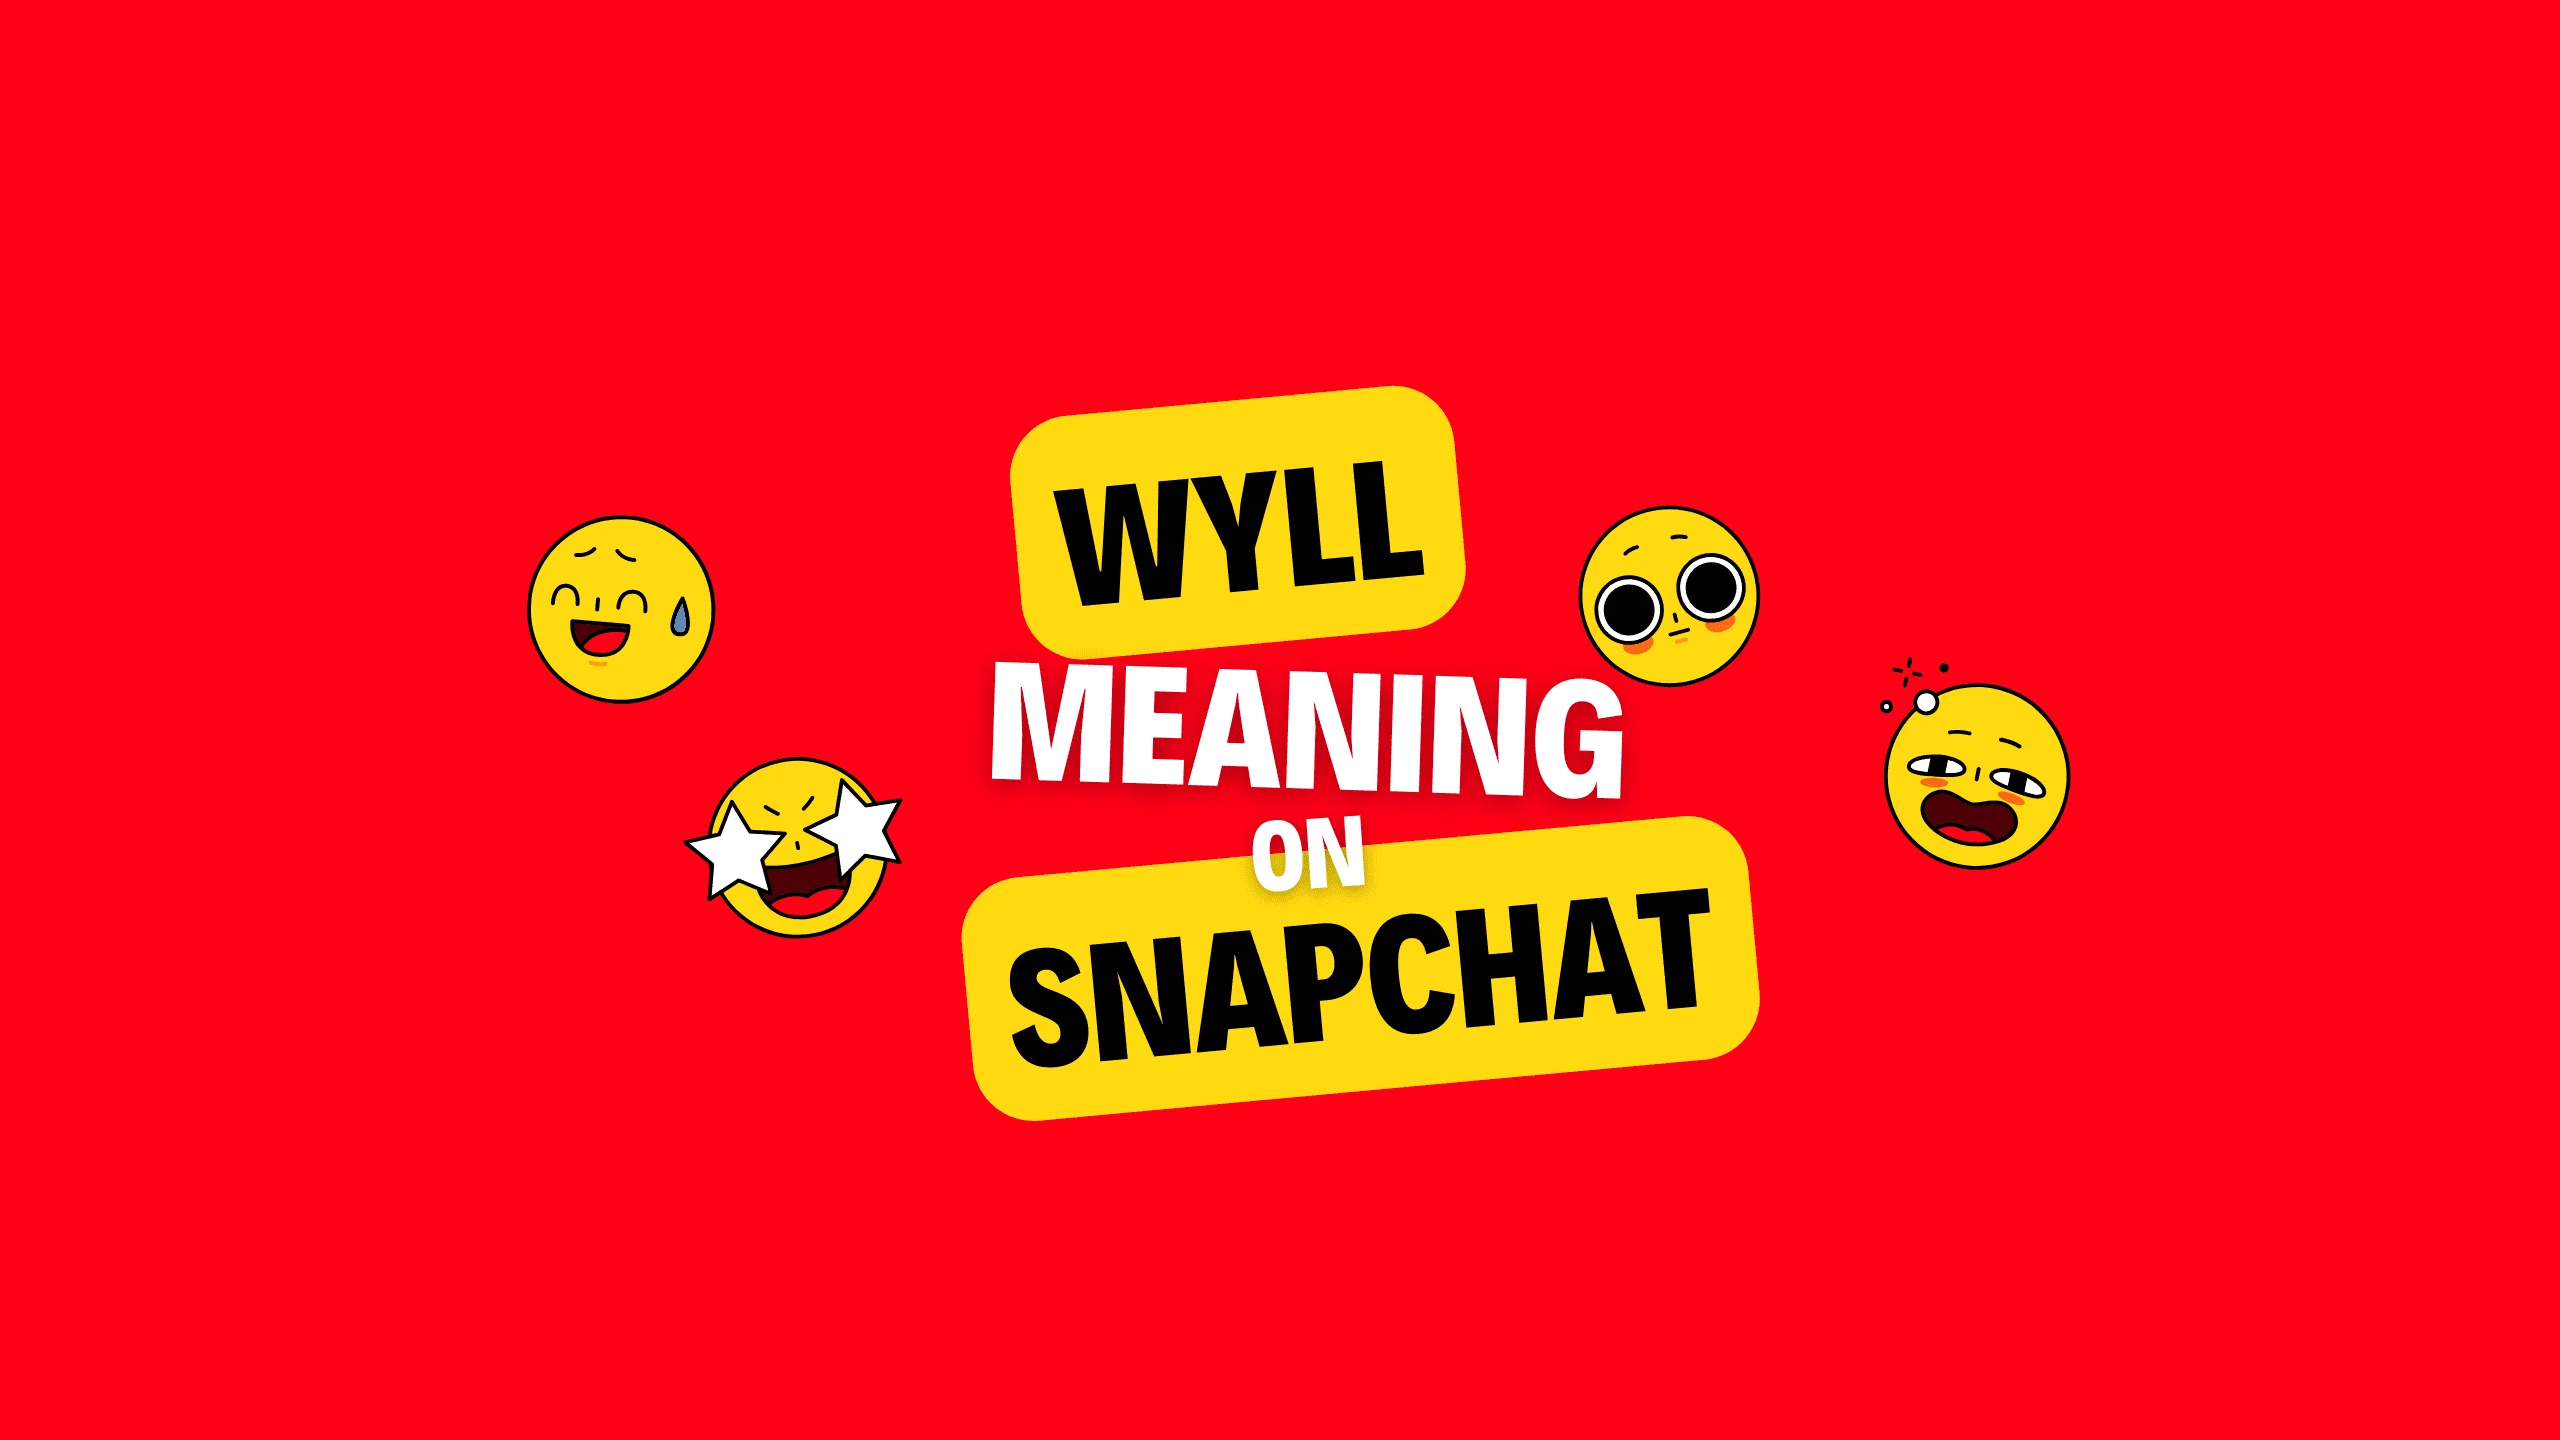 What does WYLL mean on Snapchat